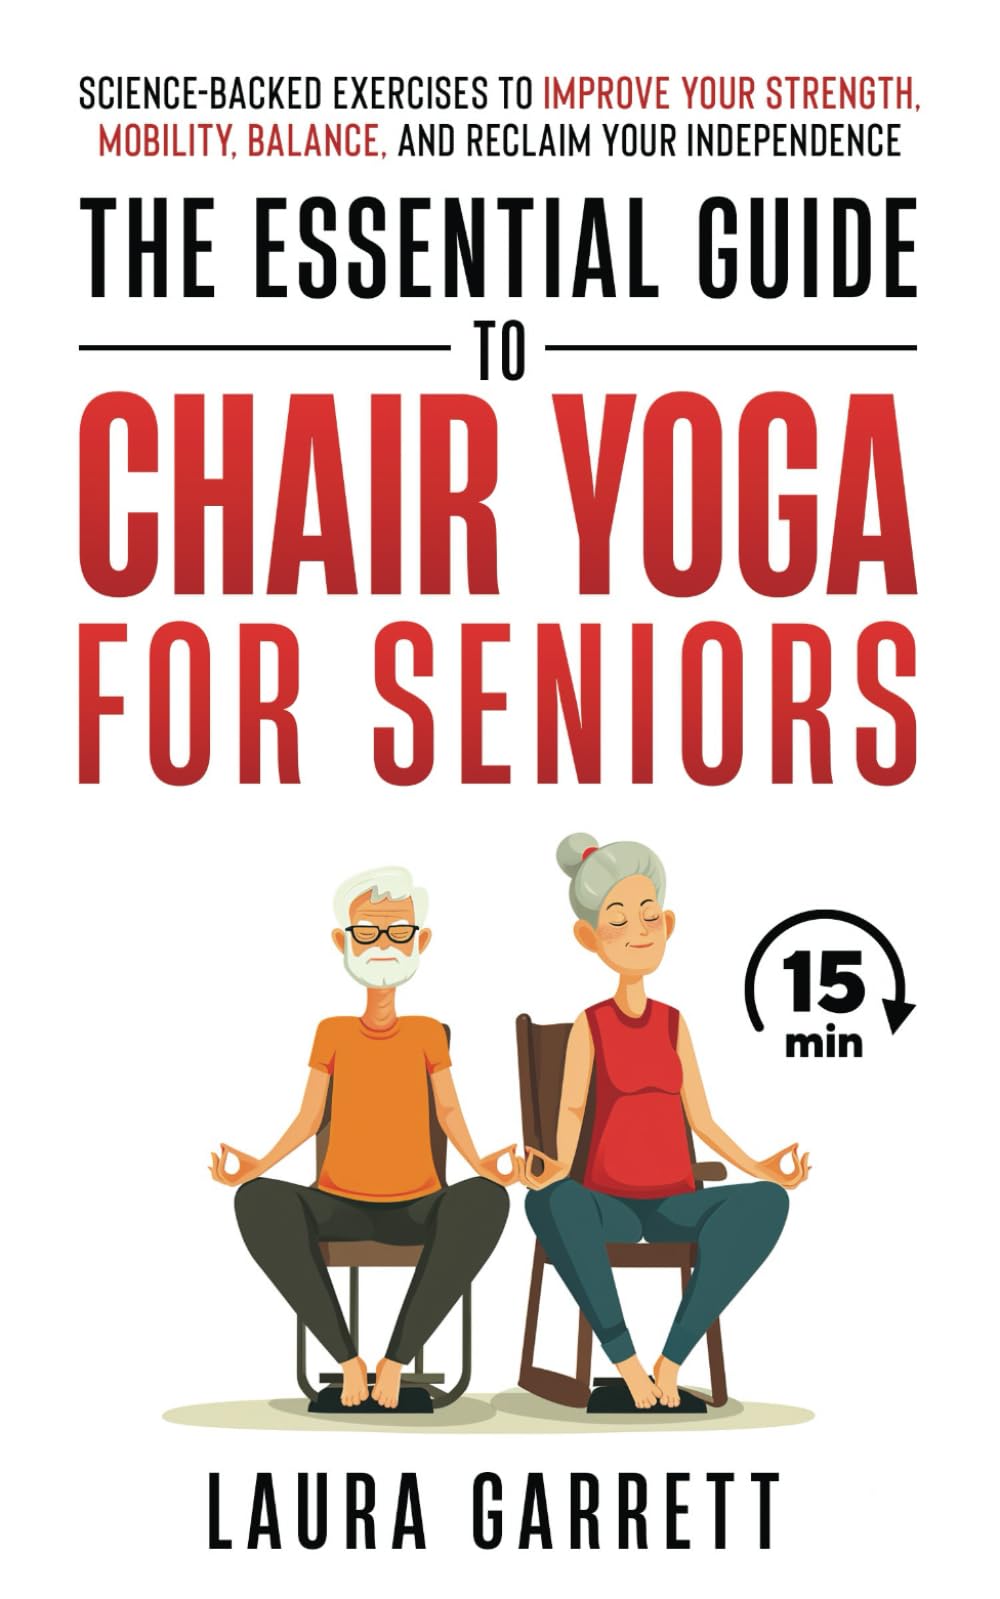 The Essential Guide to Chair Yoga for Seniors: Science-Backed Exercises to Improve Your Strength, Mobility, Balance, and Reclaim Your Independence